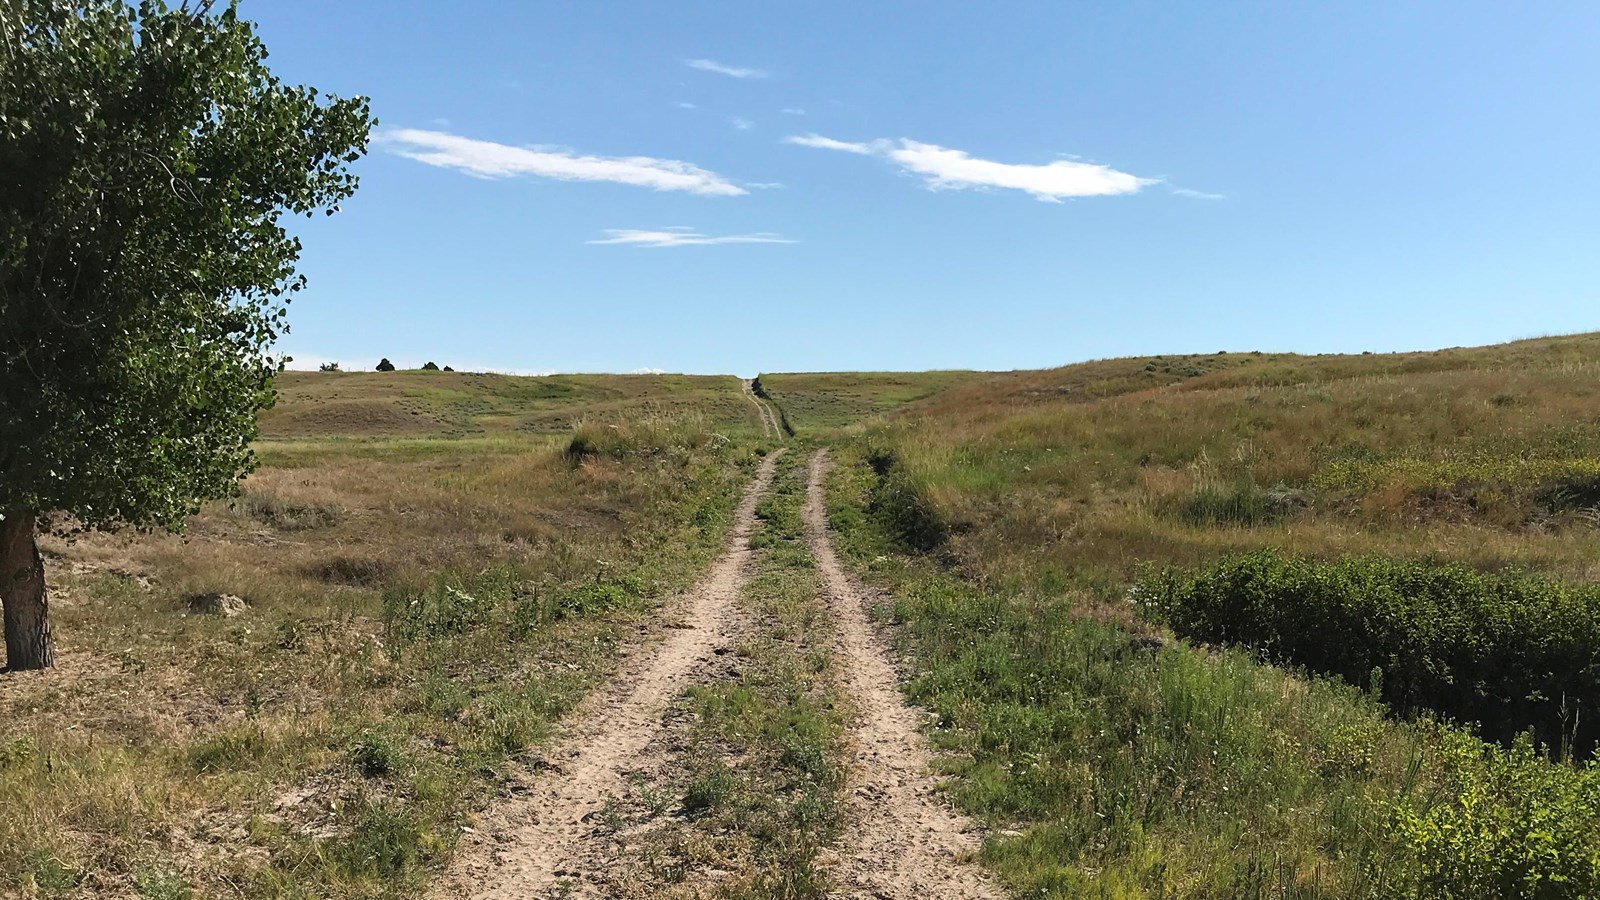 A two-track extends into the horizon among prairie grasses and a single cottonwood under a blue sky.